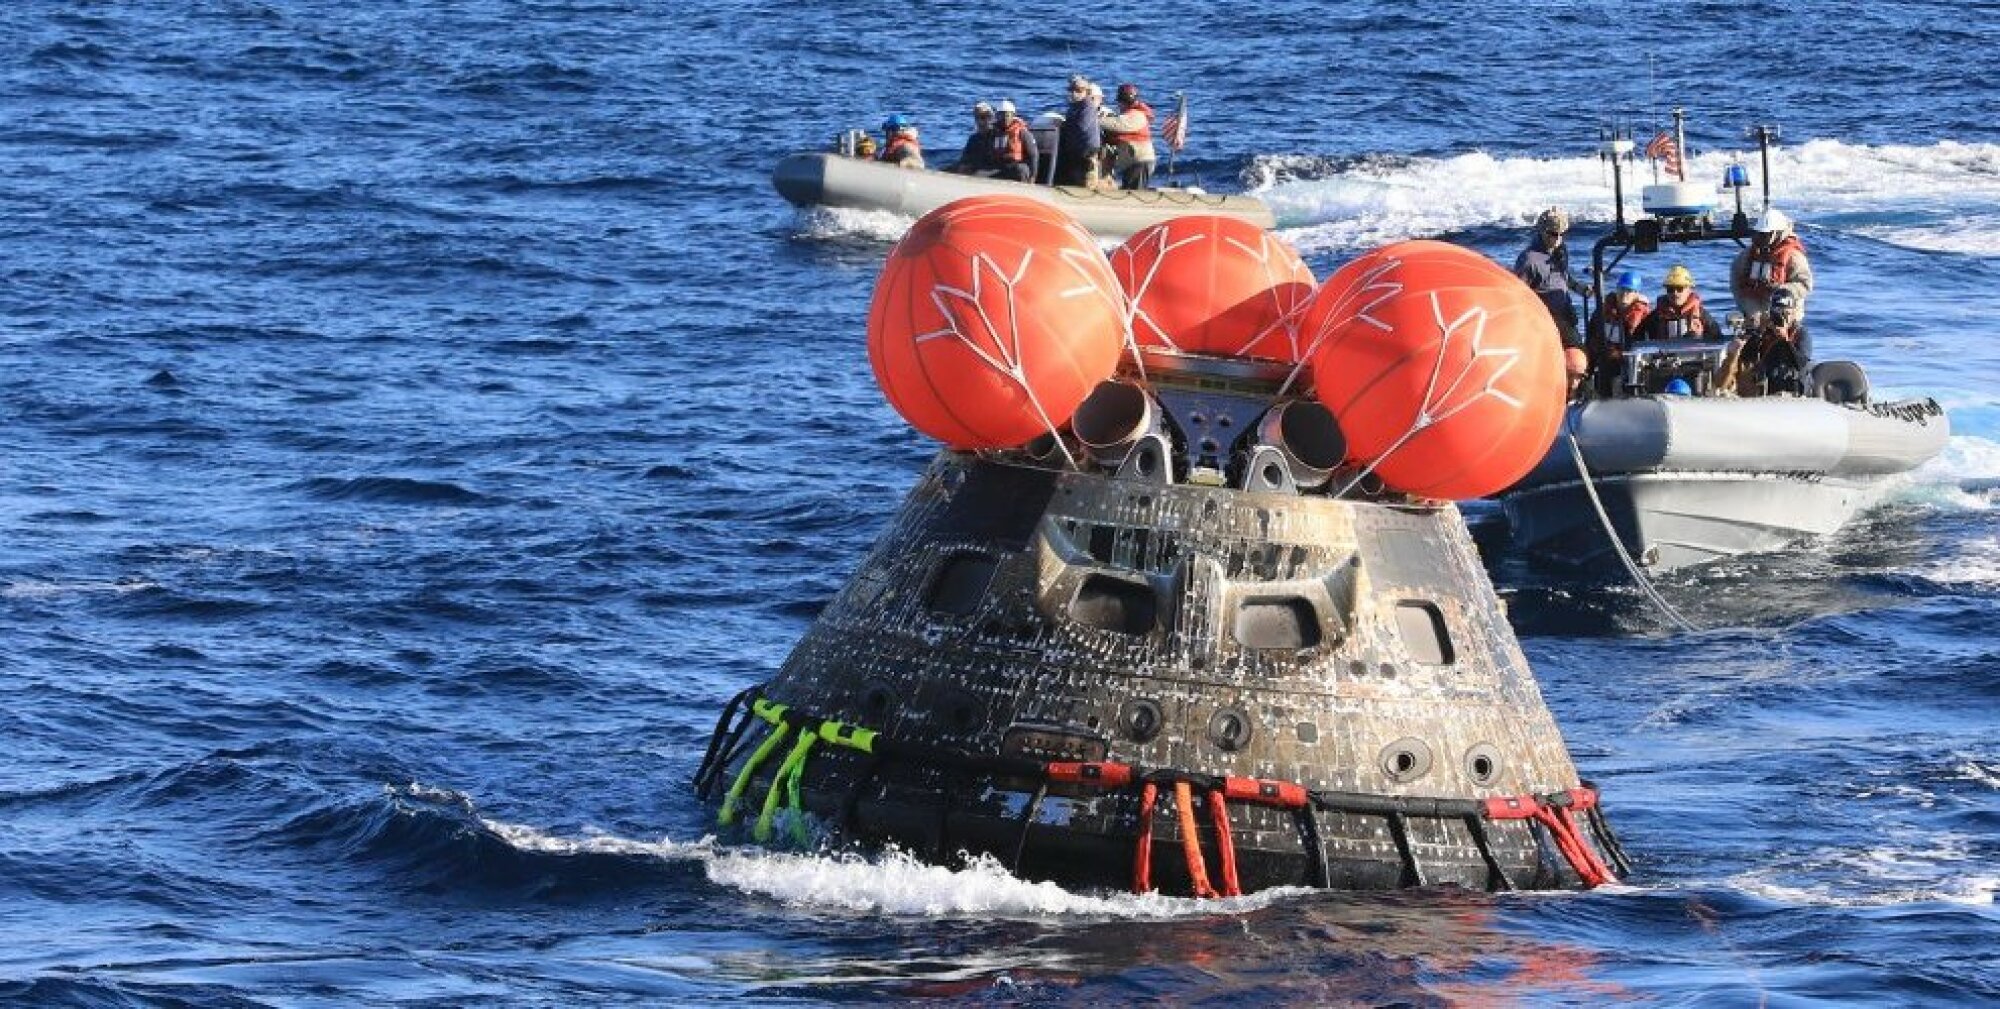 Navy divers recovering the Orion spacecraft